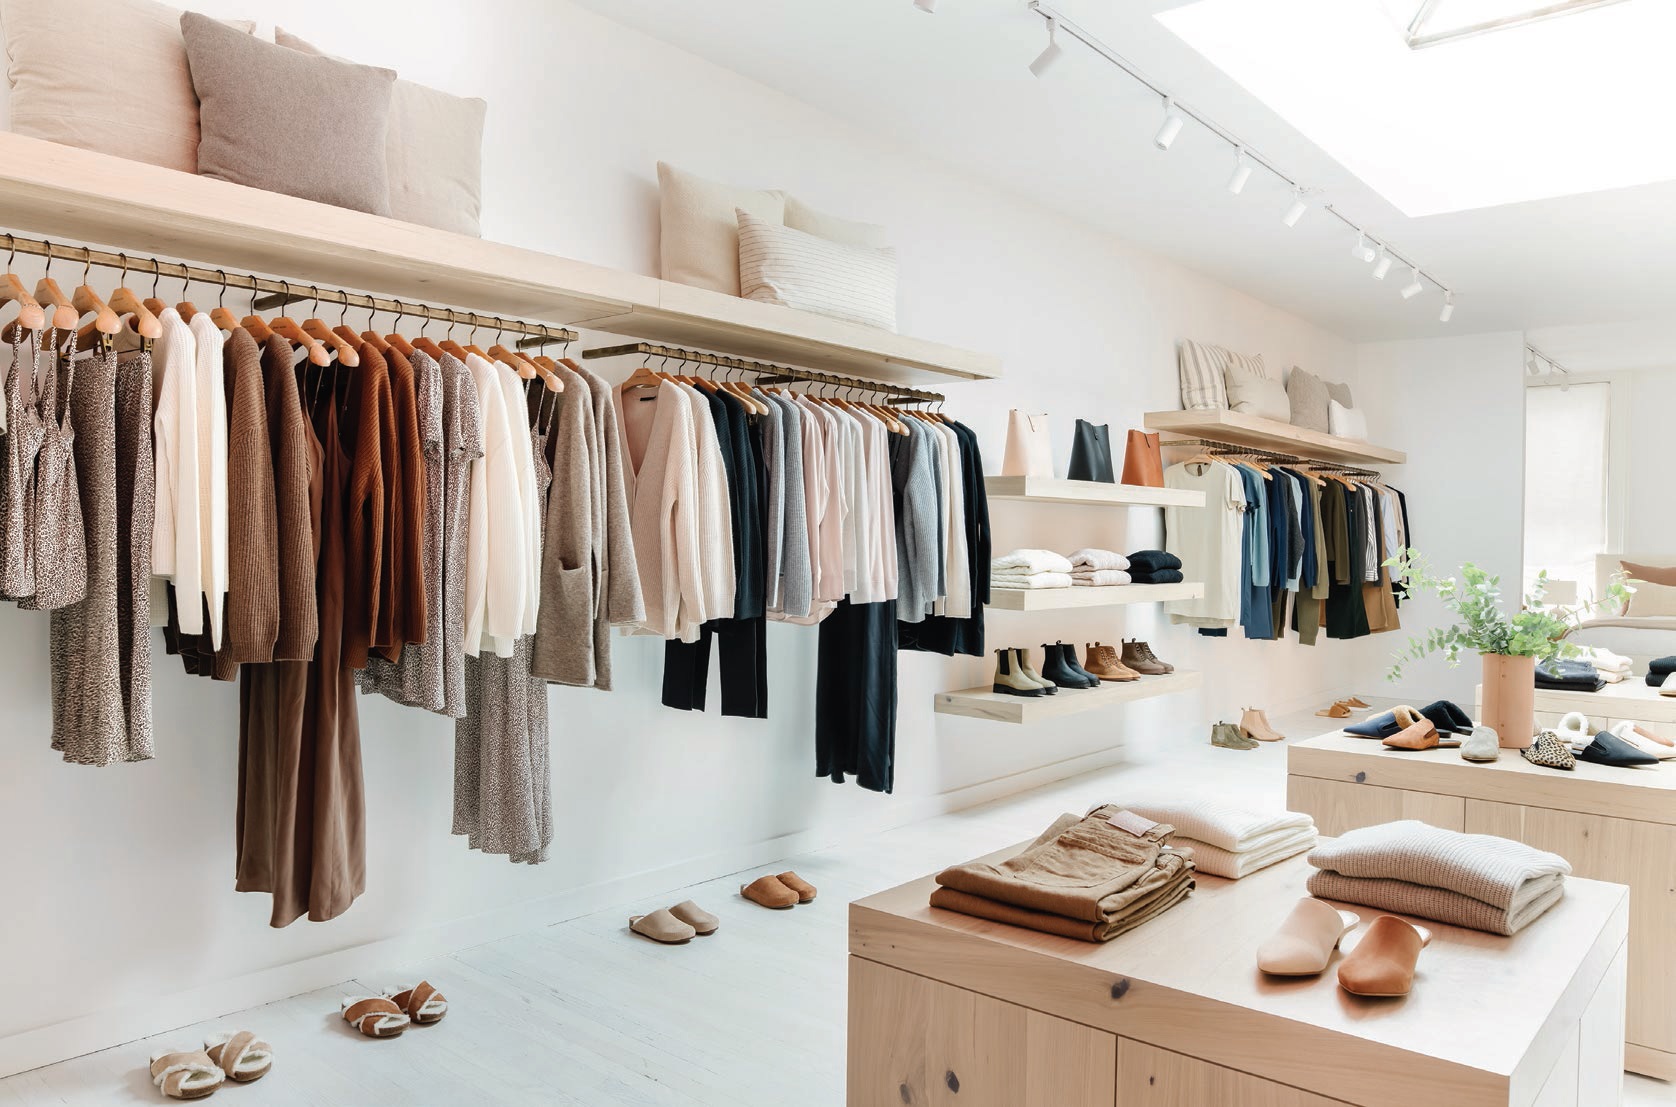 Jenni Kayne will be located in Buckhead Village and carry a mix of minimalistic home goods and apparel PHOTO COURTESY OF BRAND